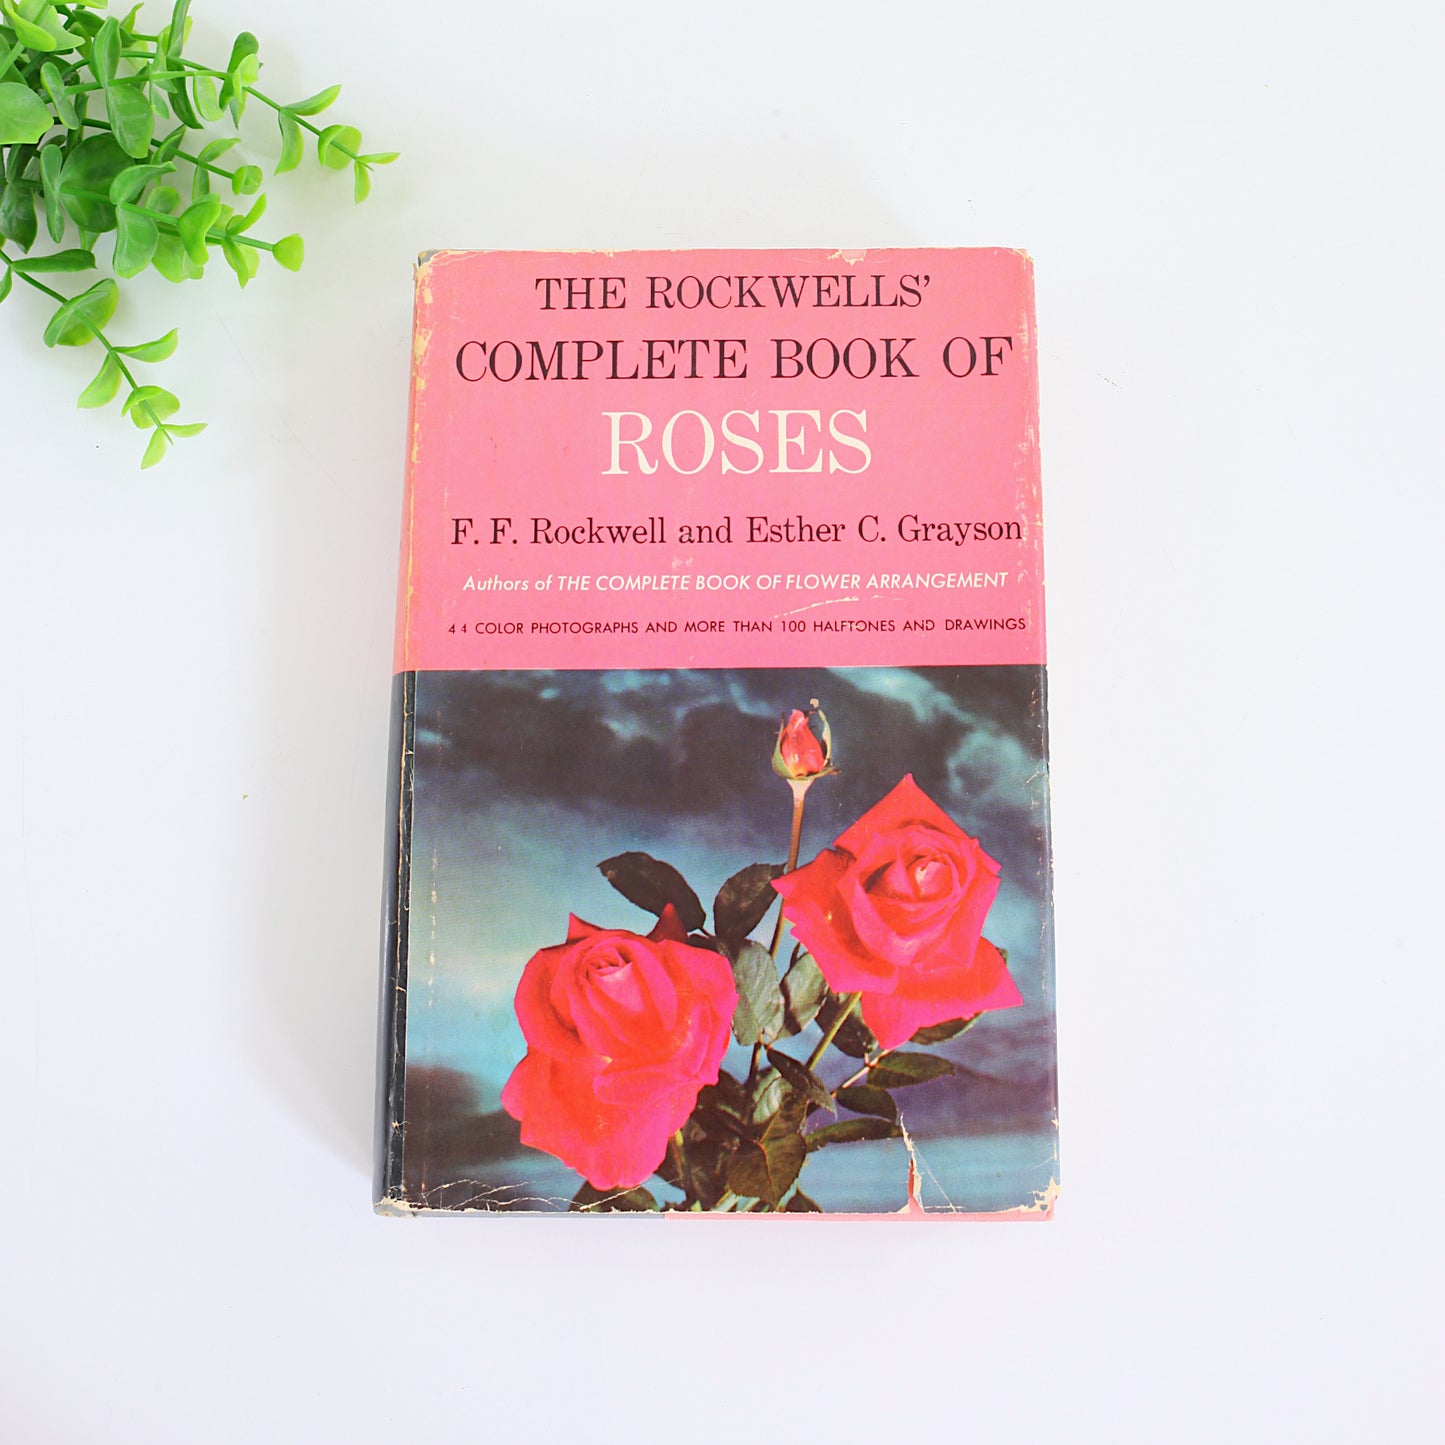 SOLD - Vintage 1958 The Rockwells' Complete Book Of Roses *Free US Shipping*